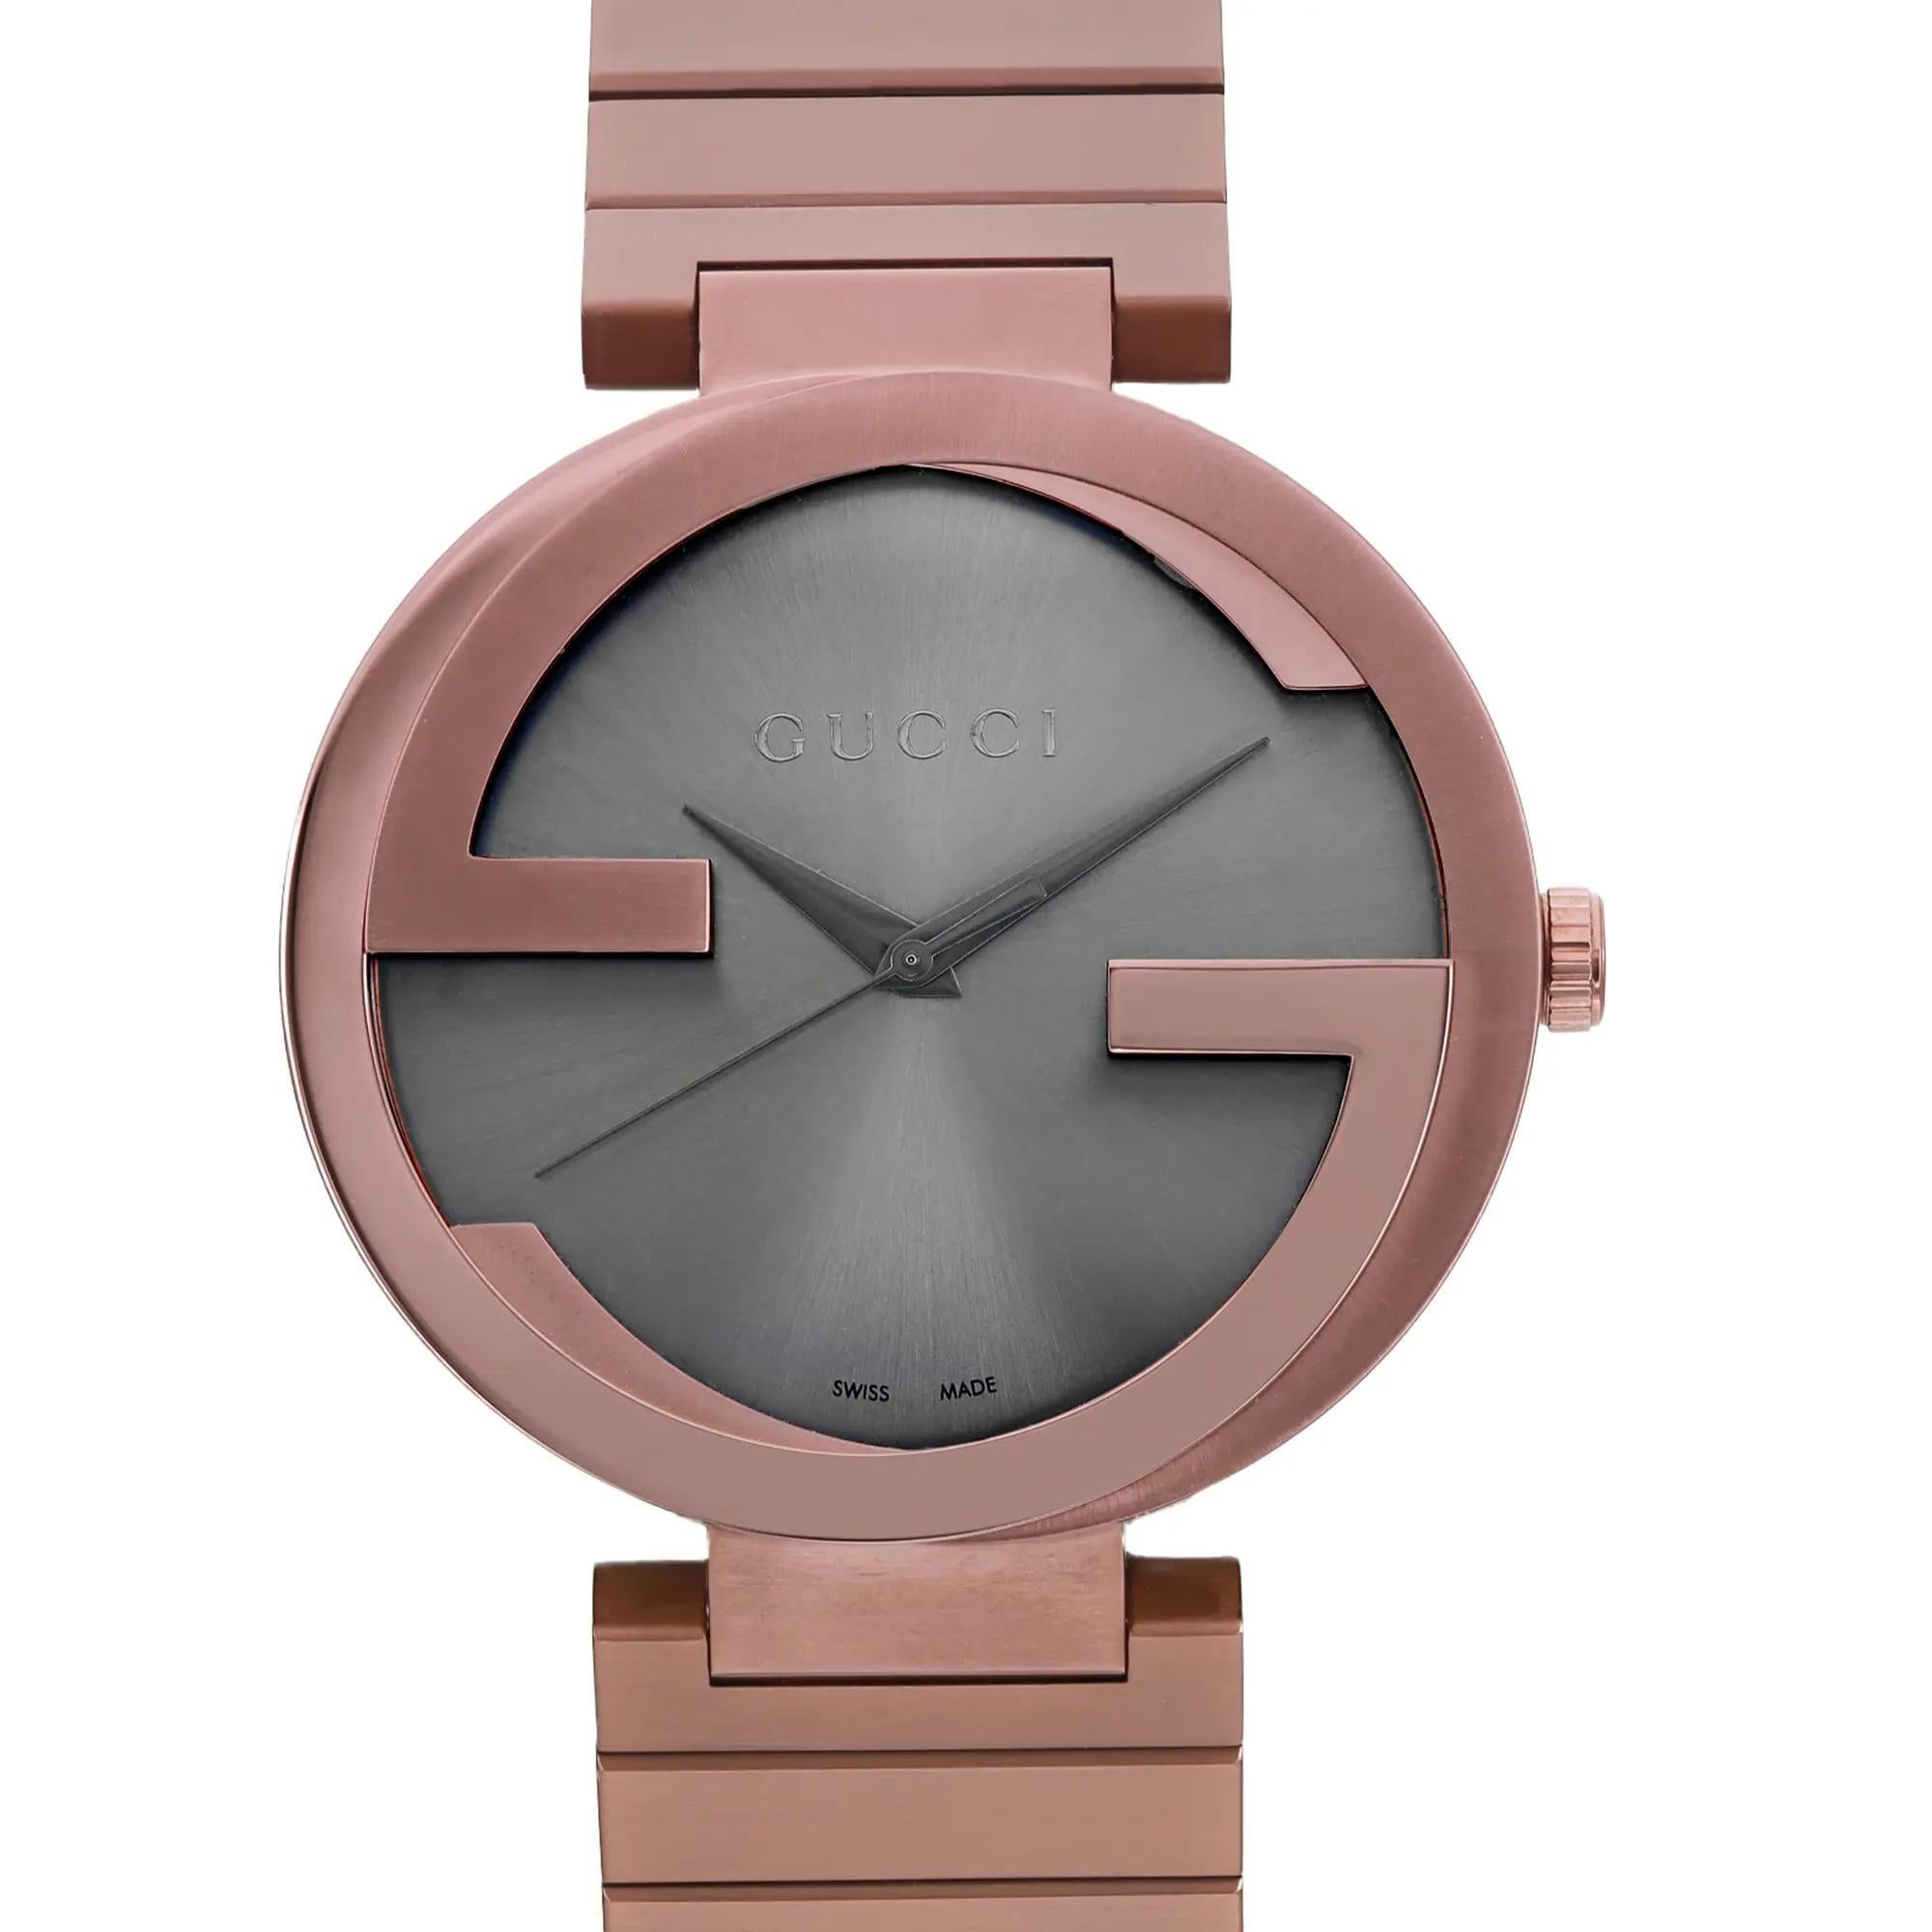 Display model. No original box and papers. 

General Information:
Brand: Gucci
Type: Wristwatch
Department: Men
Model Name: Gucci Interlocking XL
Model Number: YA133211
Country/Region of Manufacture: Switzerland
Style: Casual
Vintage: No
Customized: